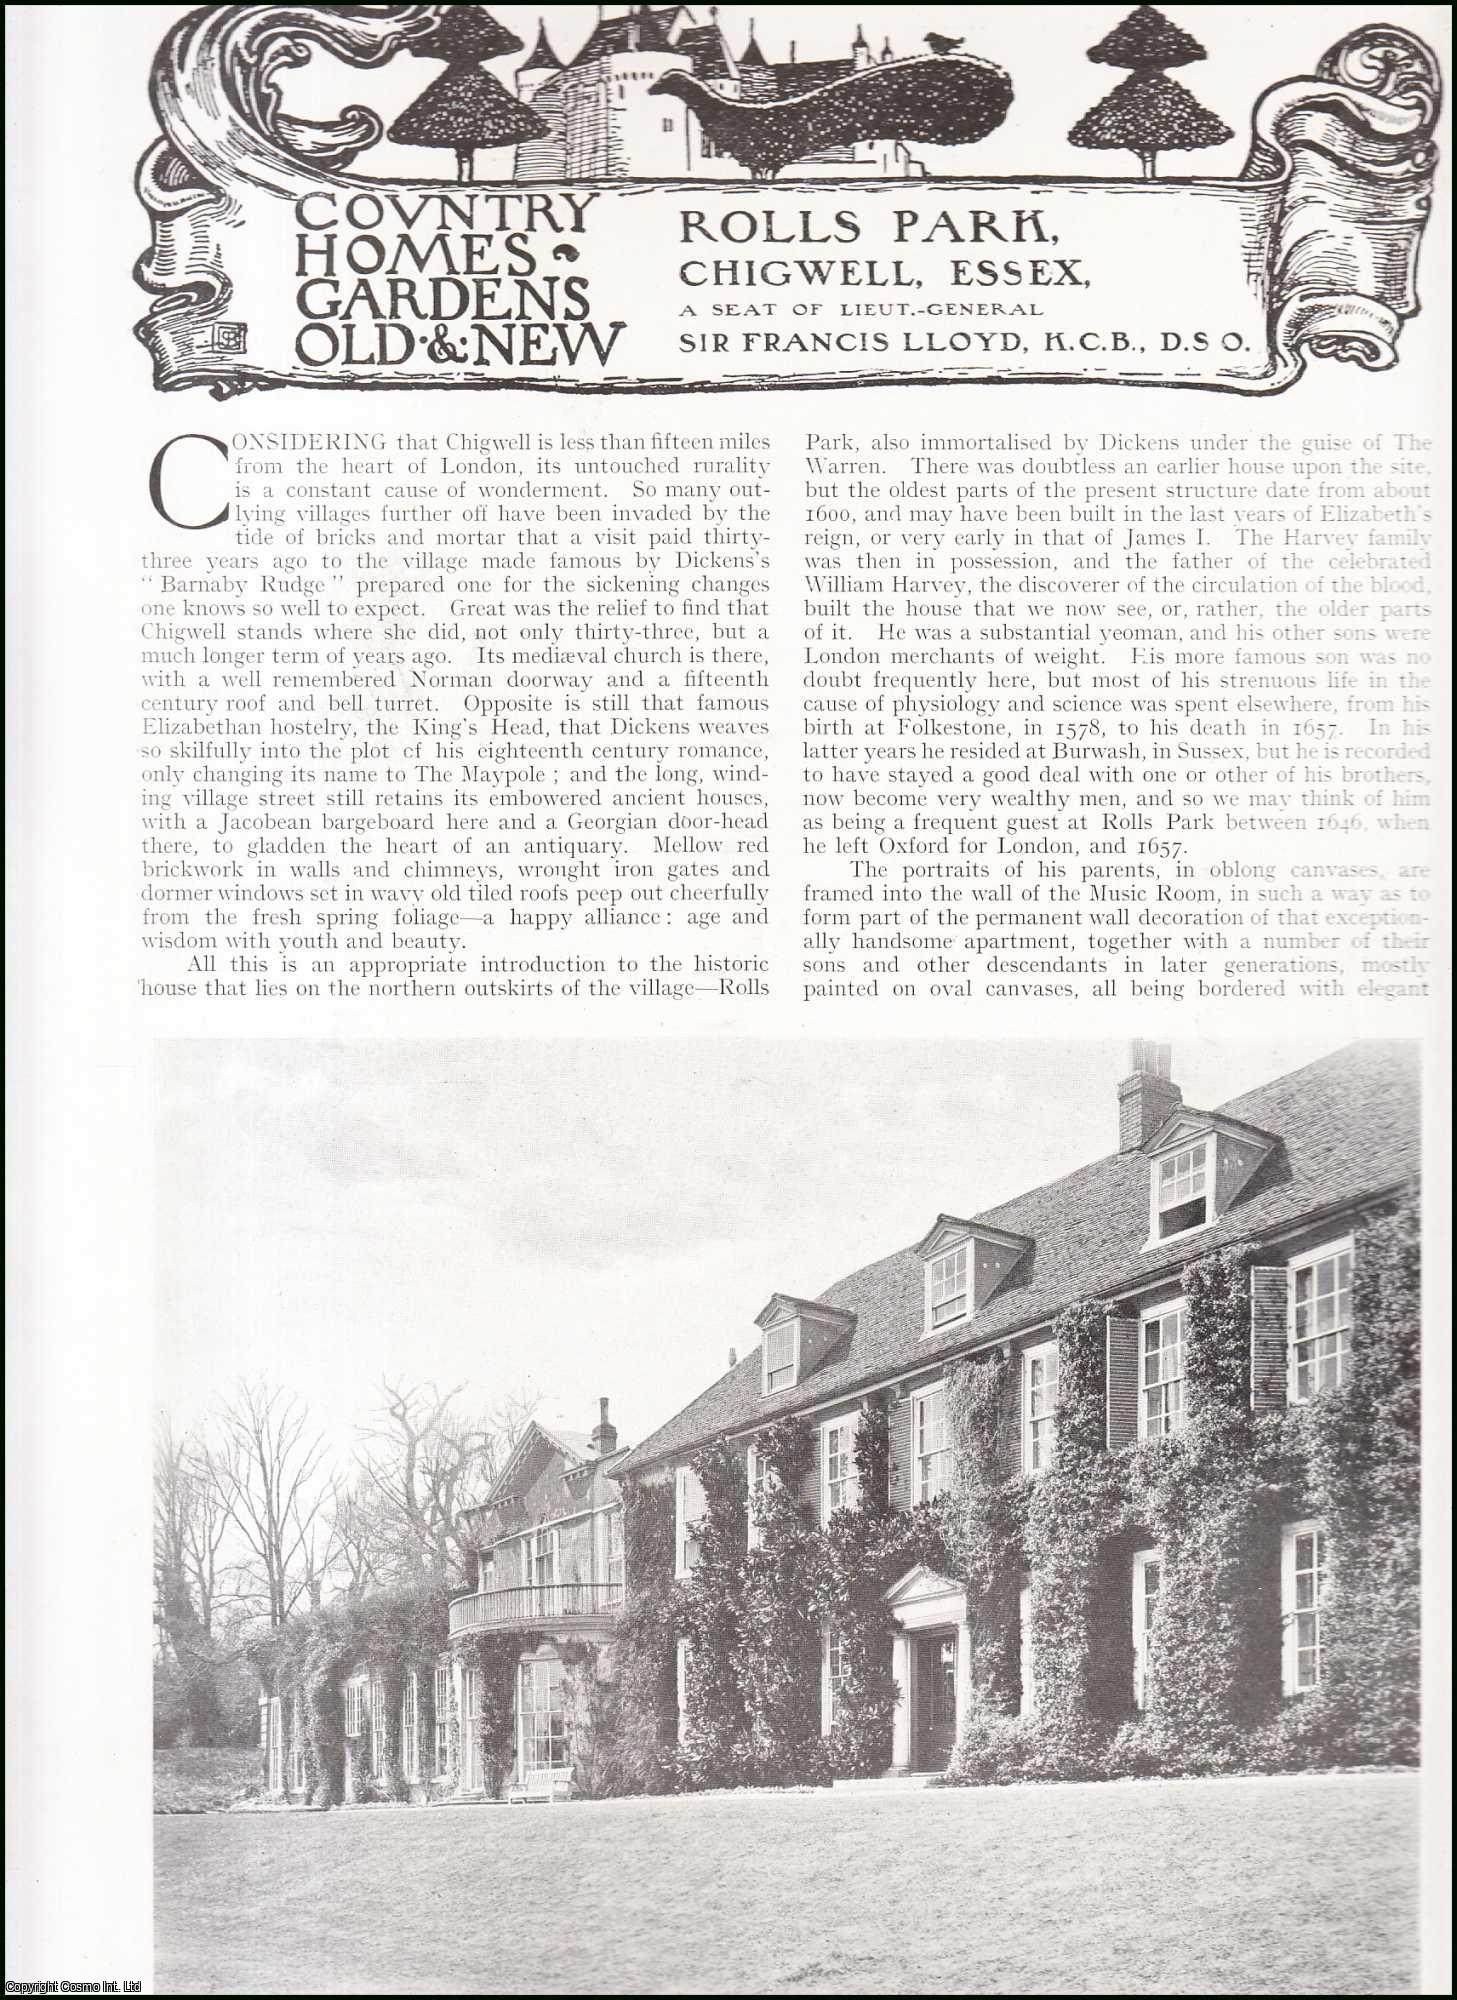 Country Life Magazine - Rolls Park, Chigwell, Essex. A Seat of Lieut.-General Sir Francis Lloyd, K.C.B., D.S.O. Several pictures and accompanying text, removed from an original issue of Country Life Magazine, 1918.